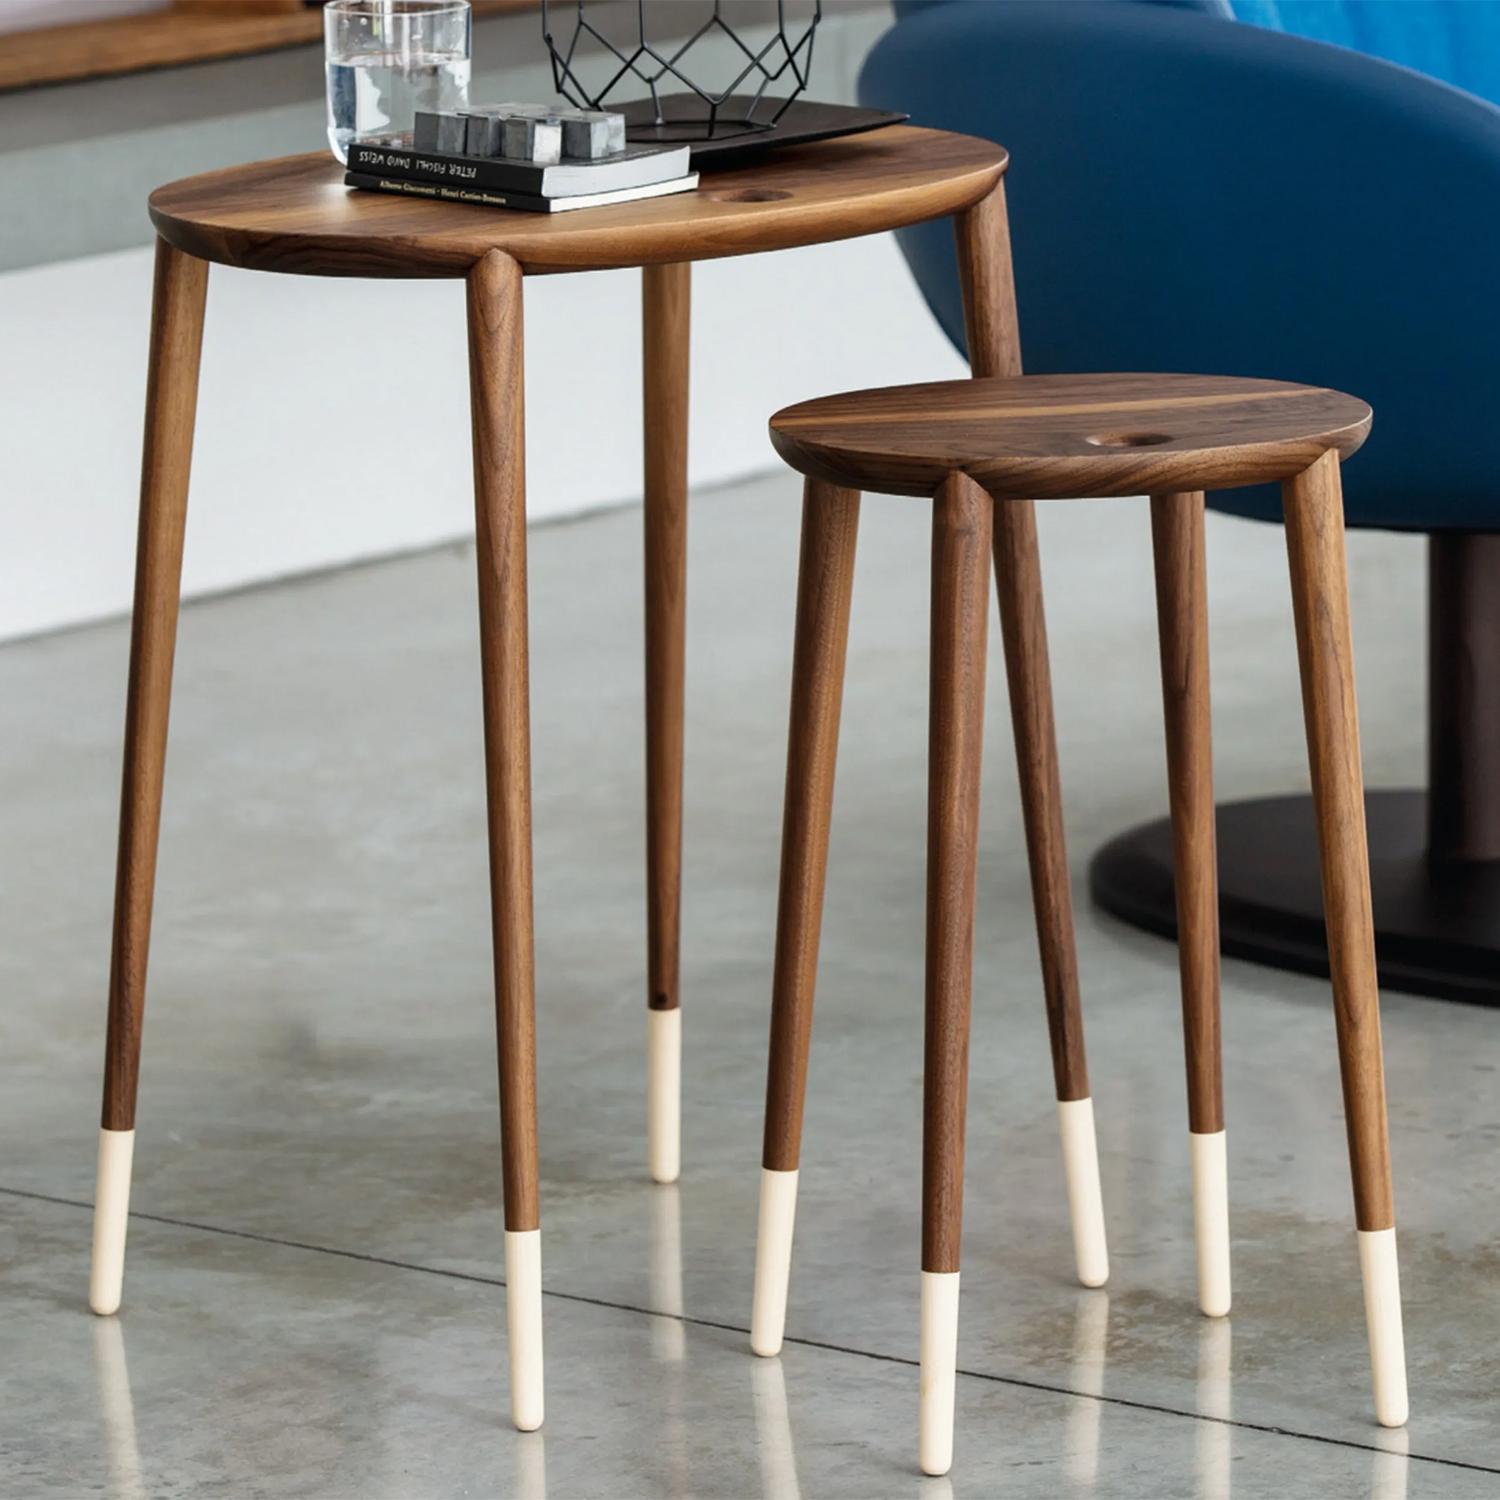 Side Table Thema Set of 2 with structure in solid walnut wood,
with feet tips in solid natural maple. Set of 2 side table:
A/ L50xD35xH60cm.
B/ L31xD28xH50cm.